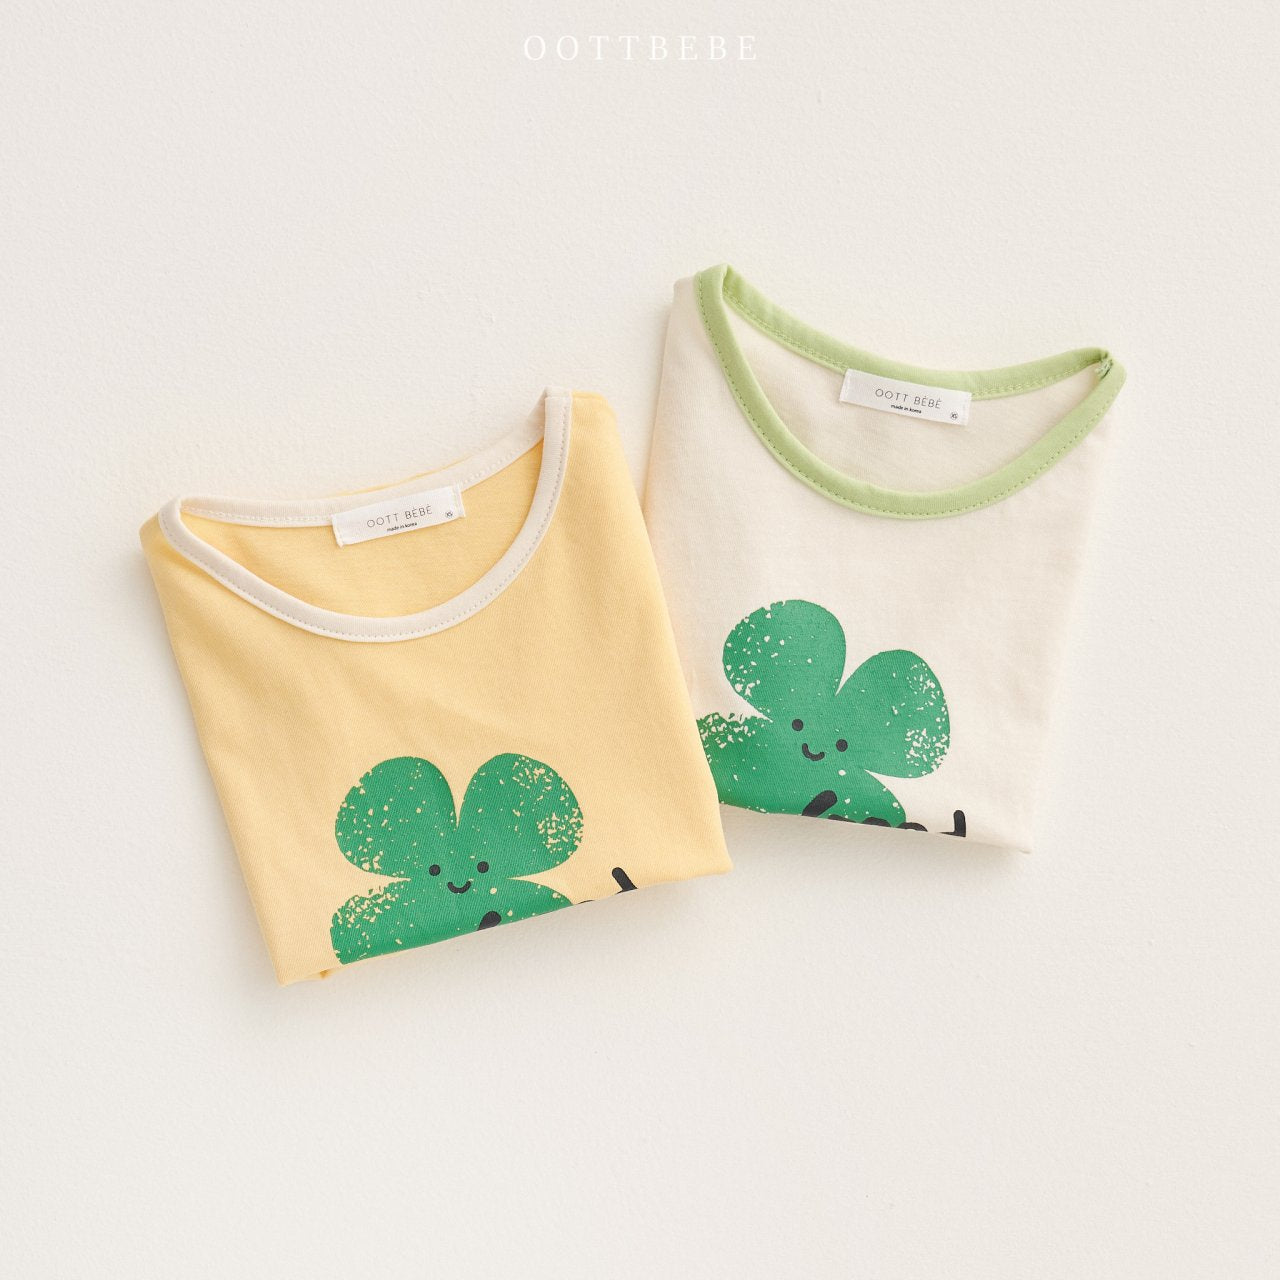 [Oottbebe] Good Luck T-Shirts